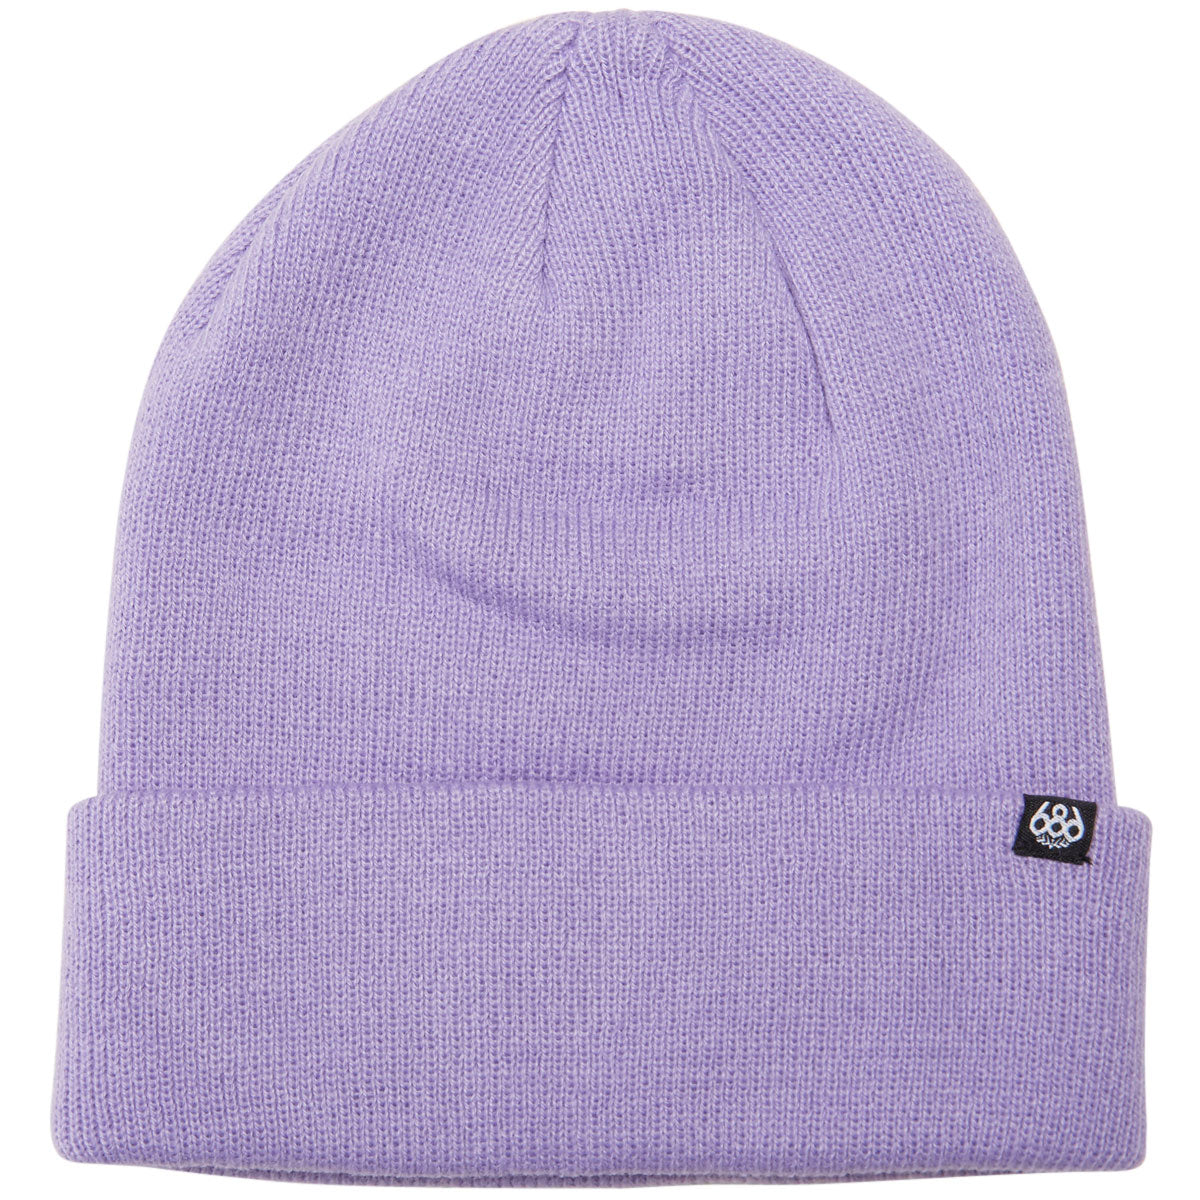 686 Standard Roll Up Beanie - Violet image 1